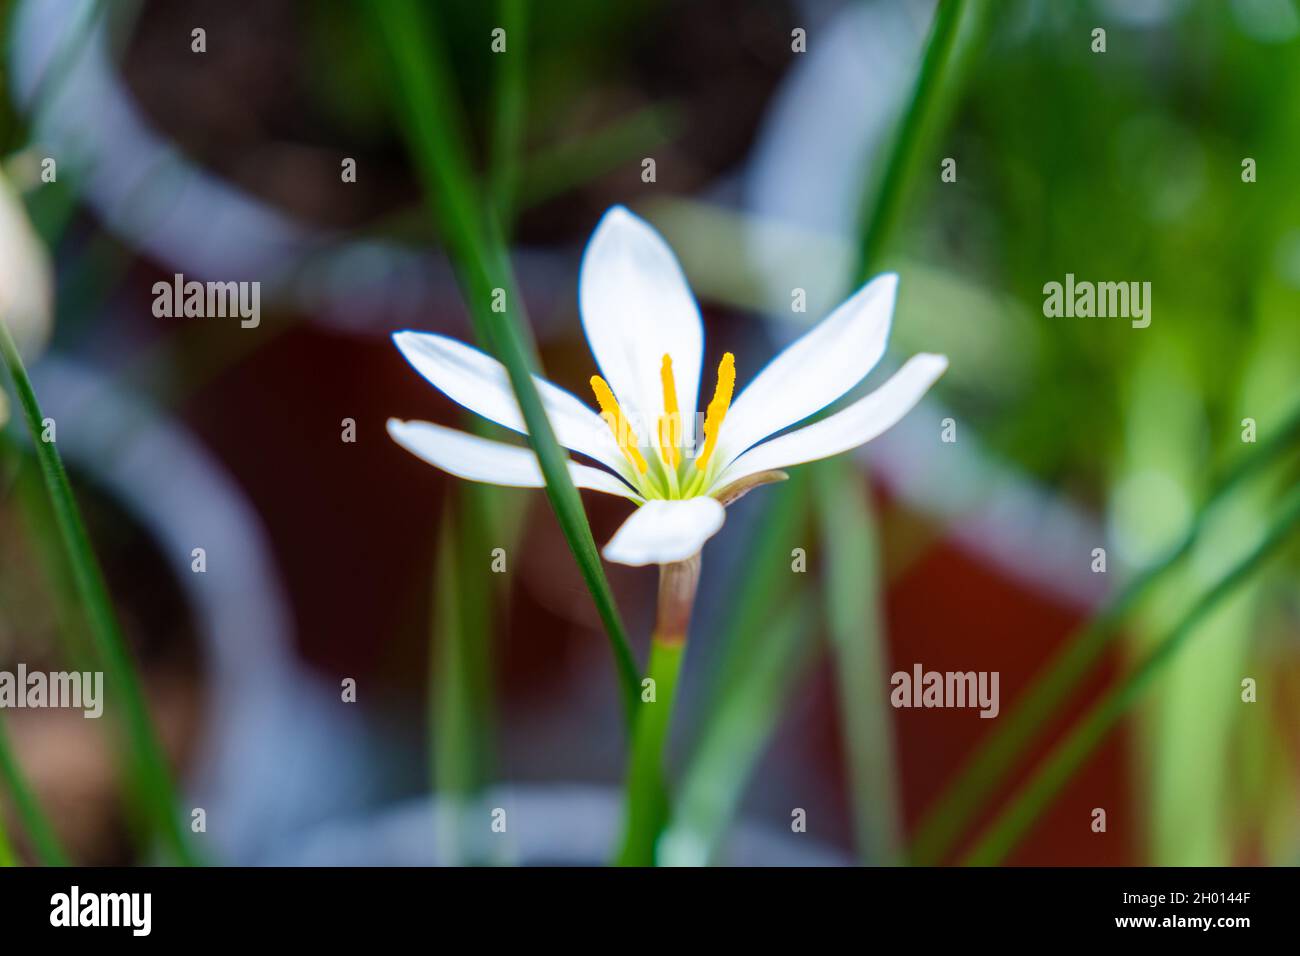 Focus on nature white flower and green grass Stock Photo